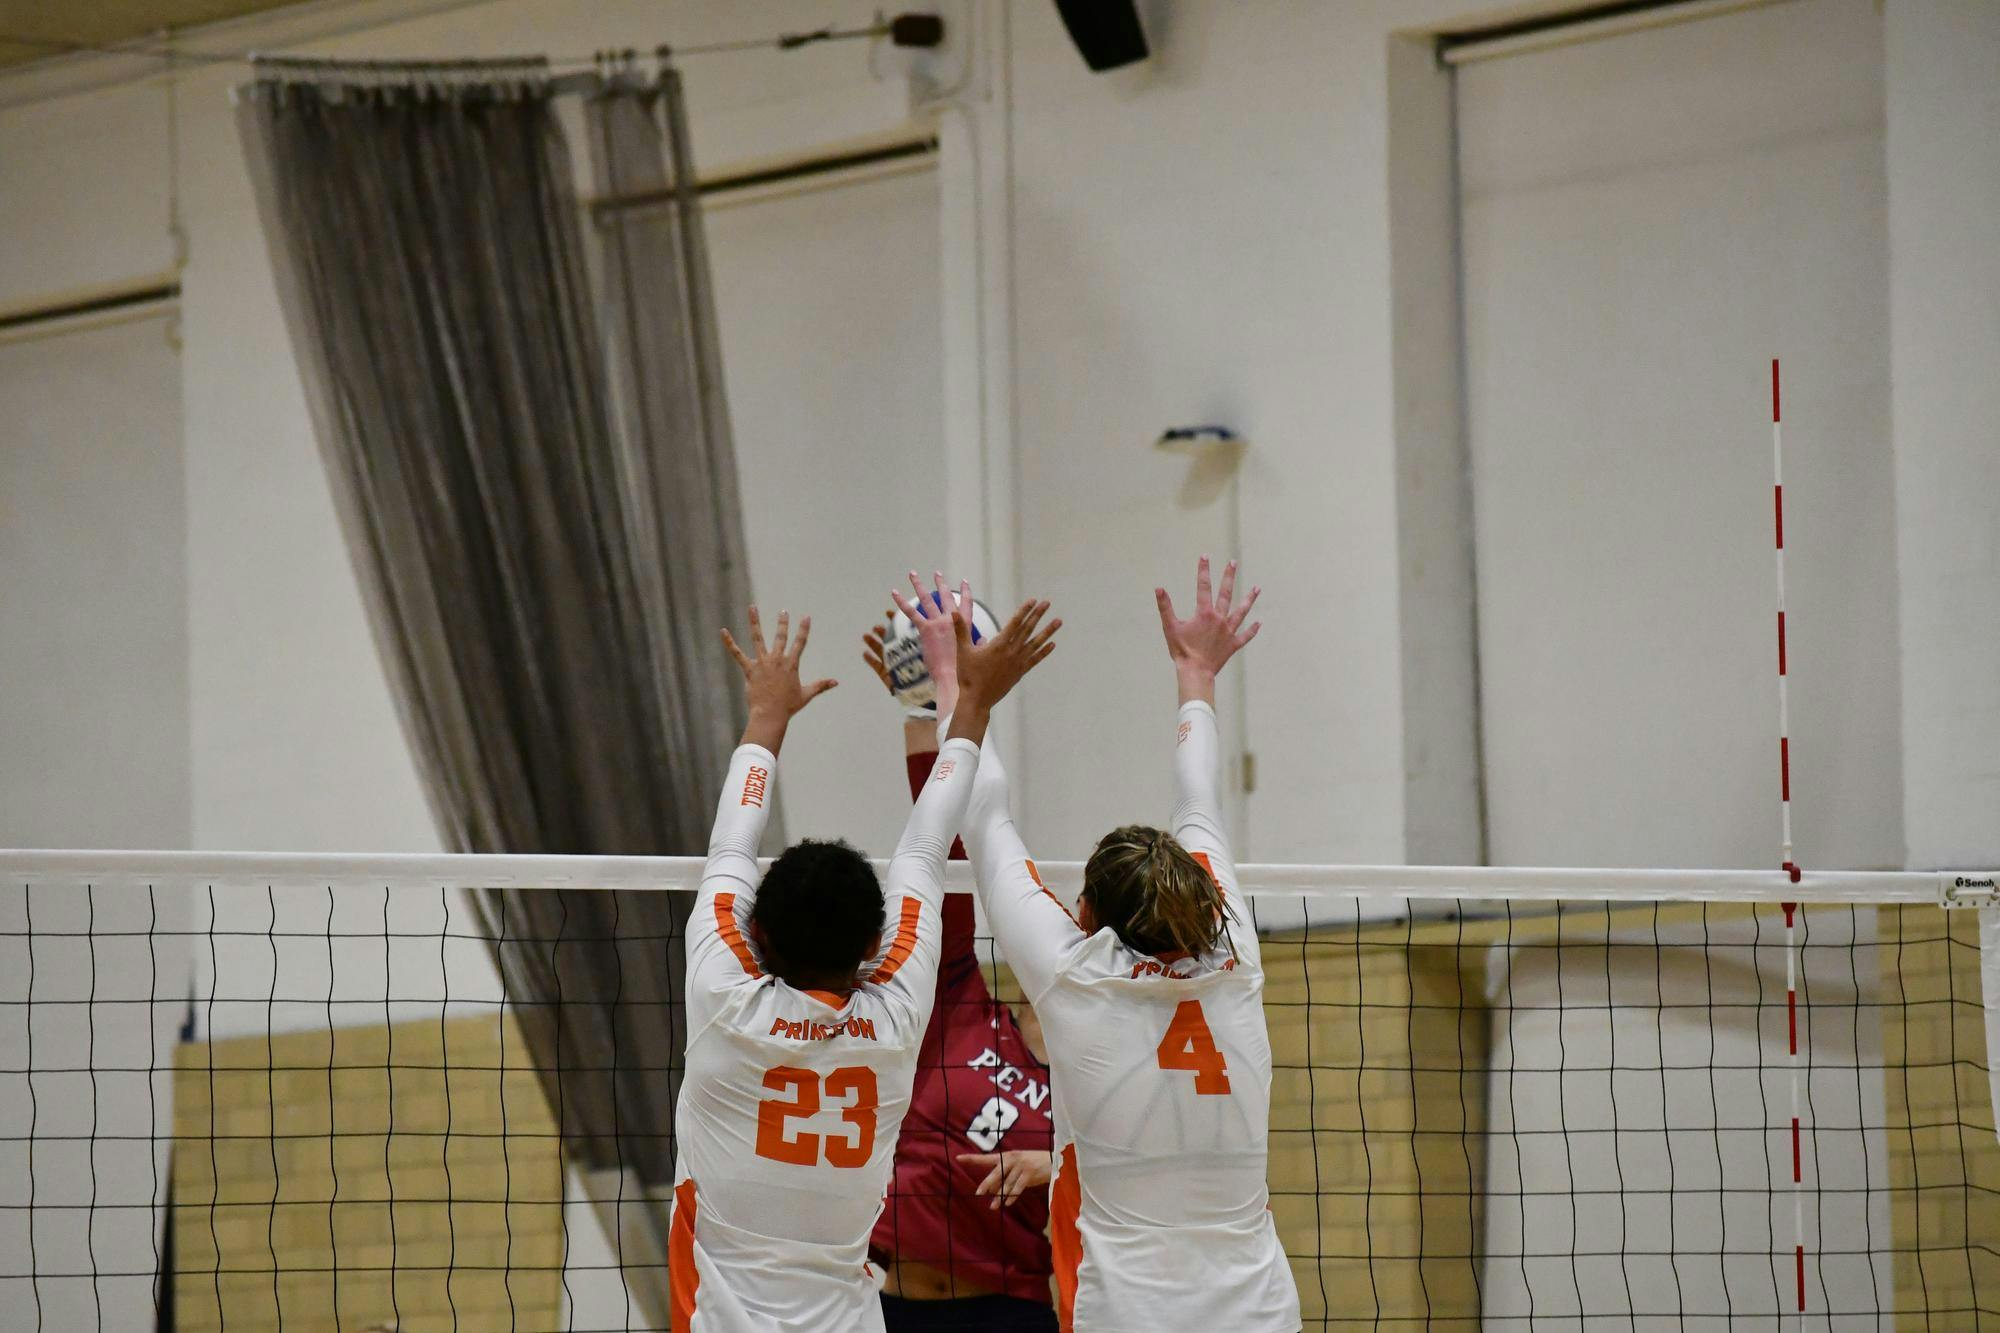 Two Princeton volleyball players jump above the net to block a hit by an opposing team player. 